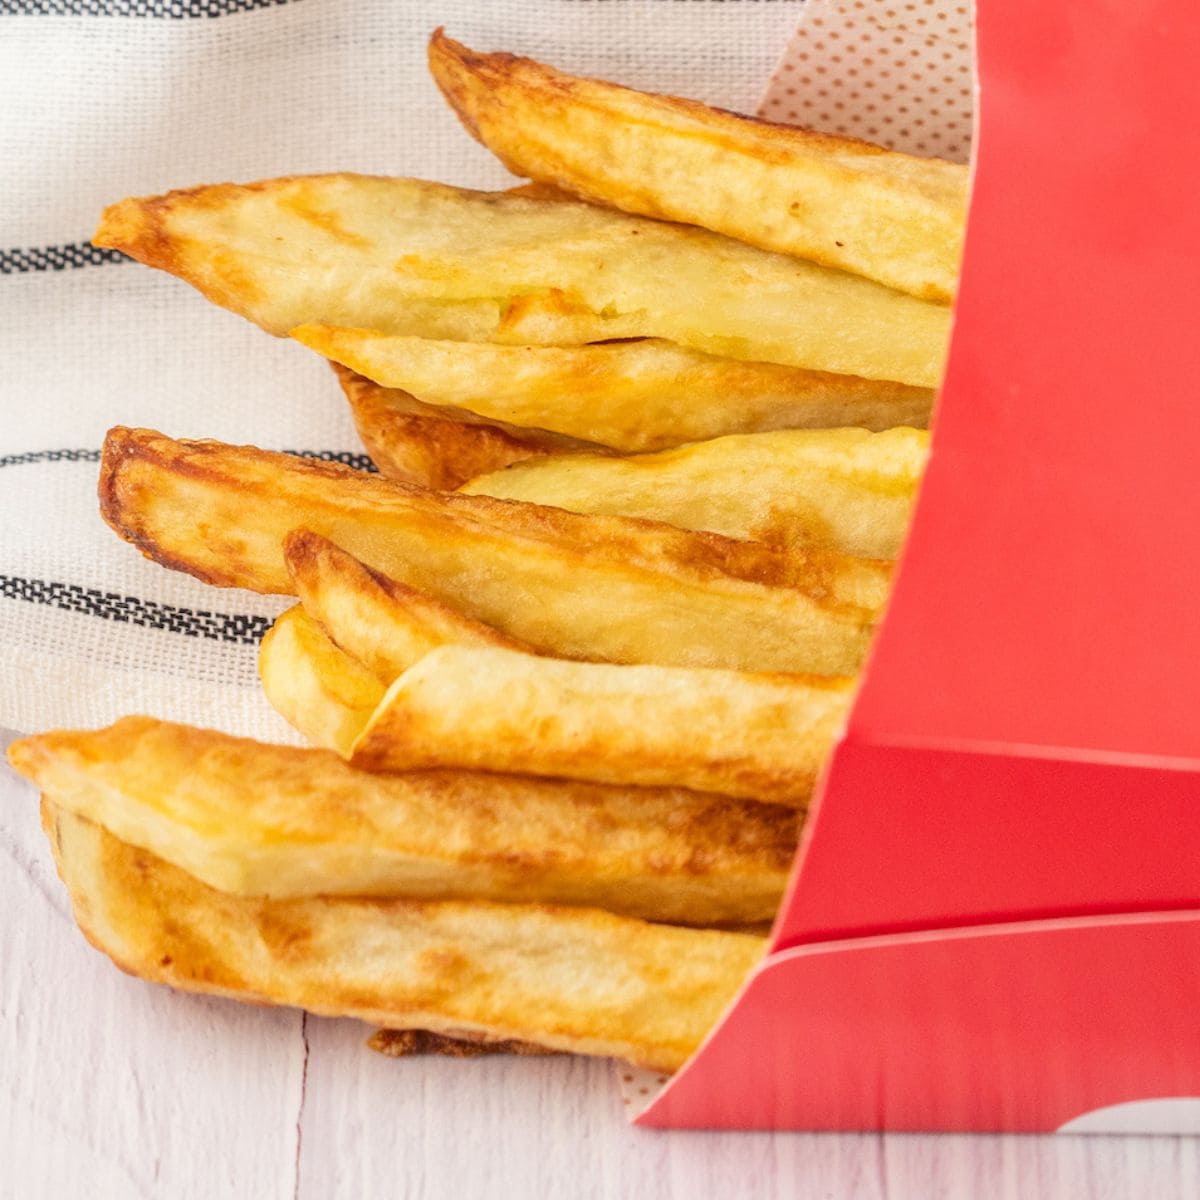 french fries in a red paper sleeve on a table